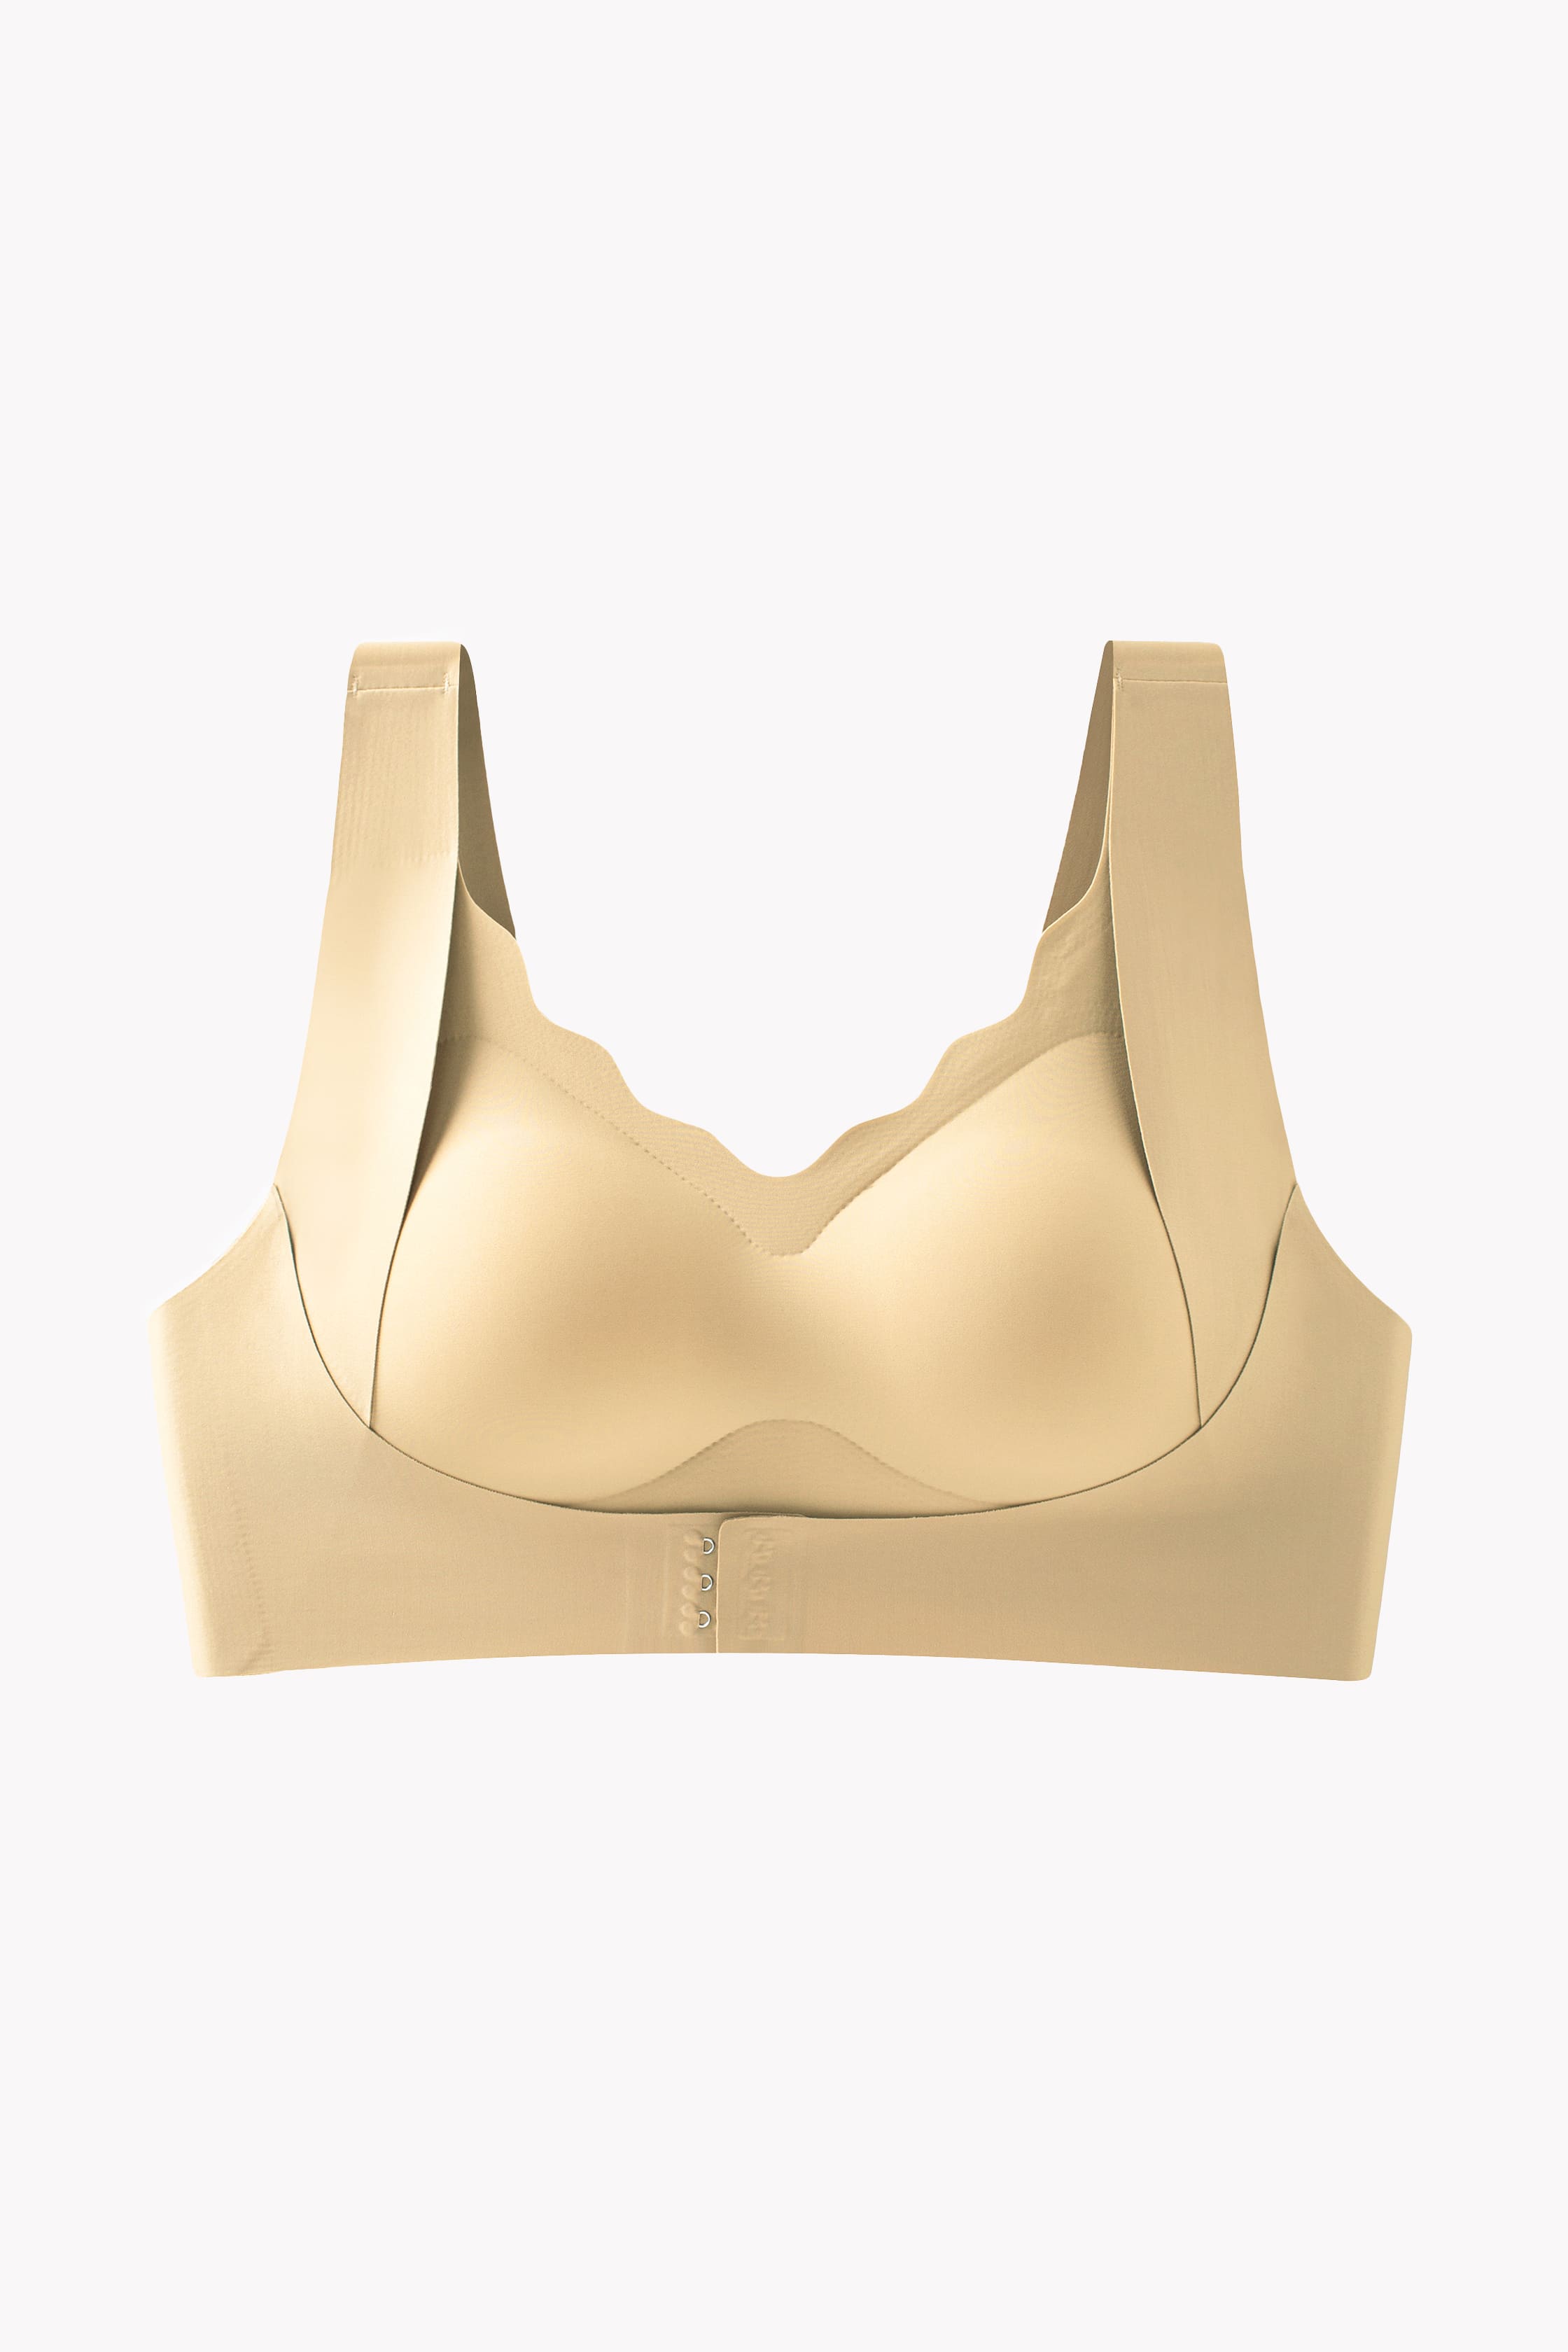 Easy Pieces™️ Front Closure Push-Up Wire Free Bra